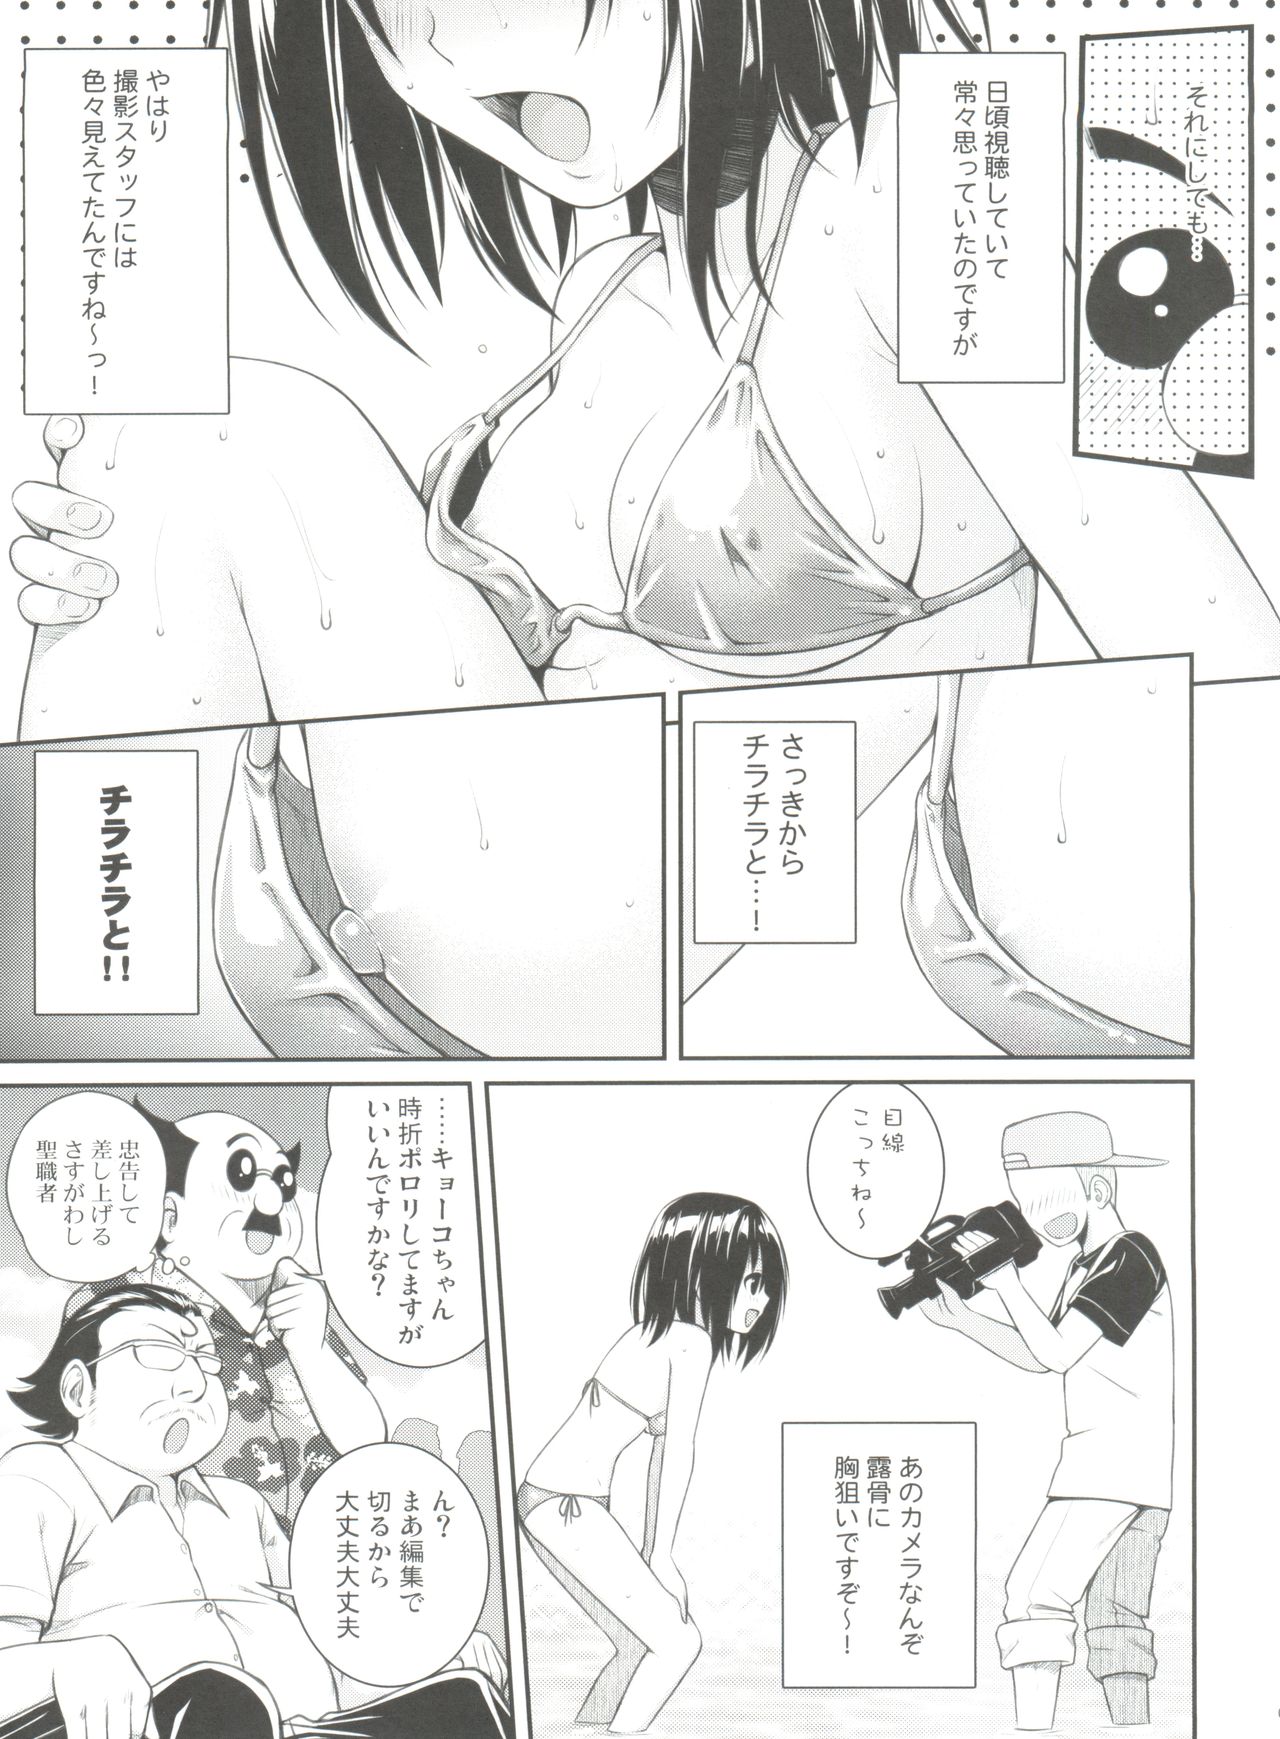 (COMIC1☆8) [40010 1-GO (40010Prototype)] MAGICAL☆IV (To Love-Ru) page 8 full